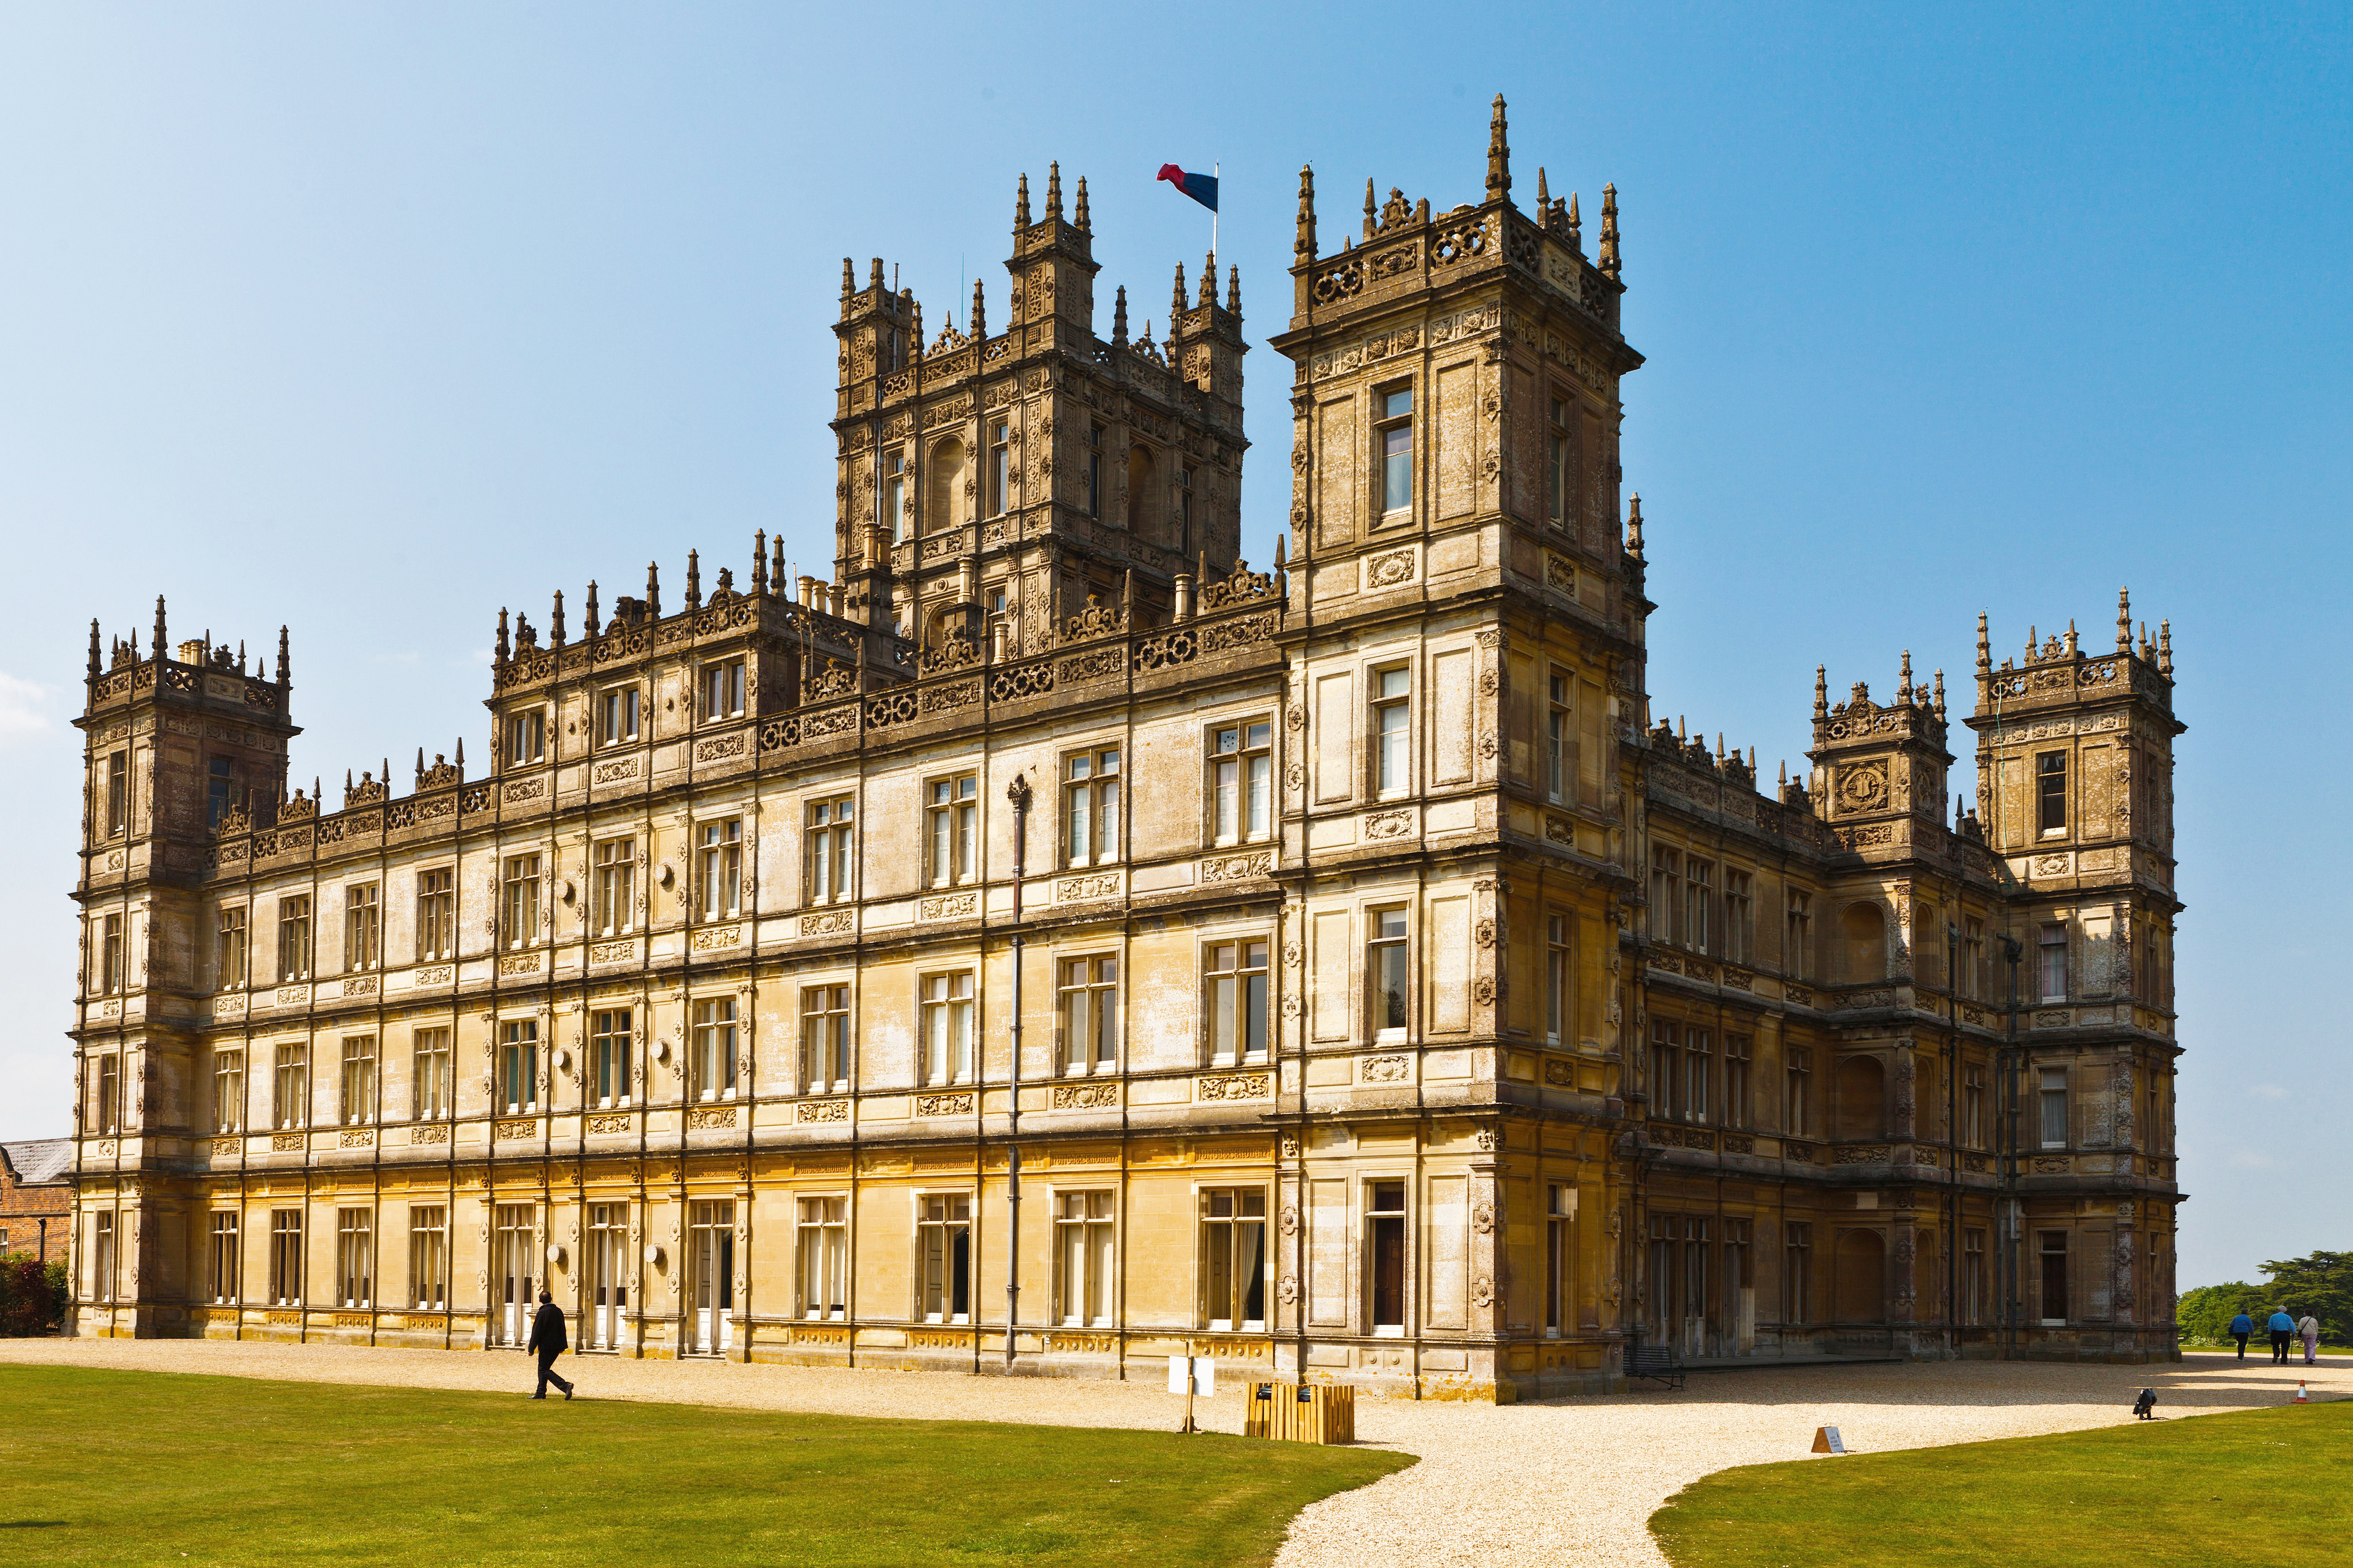 Downton returns for one long episode